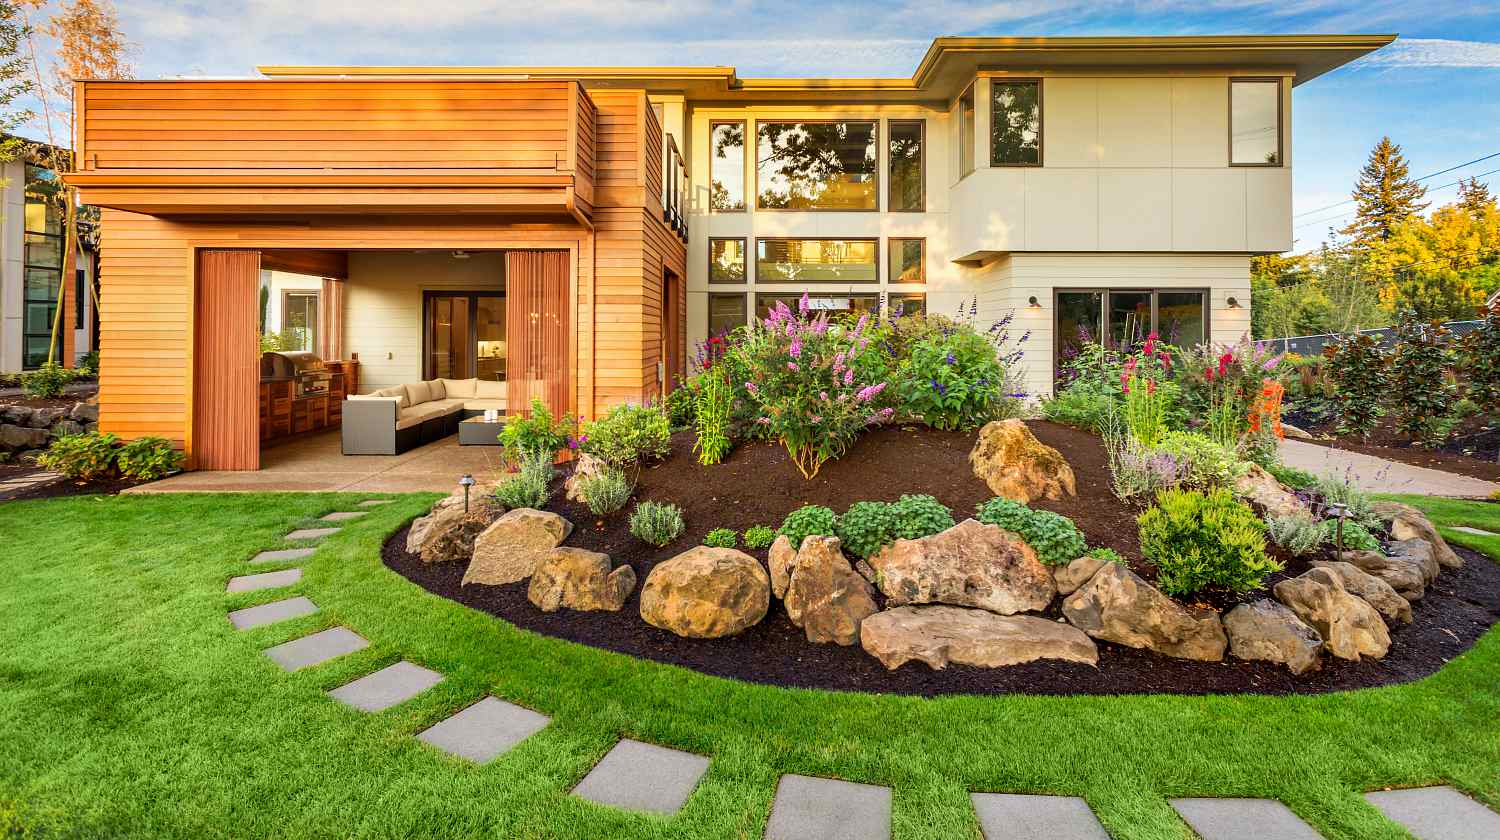 11 Tips That Will Help Get You a Beautiful Yard